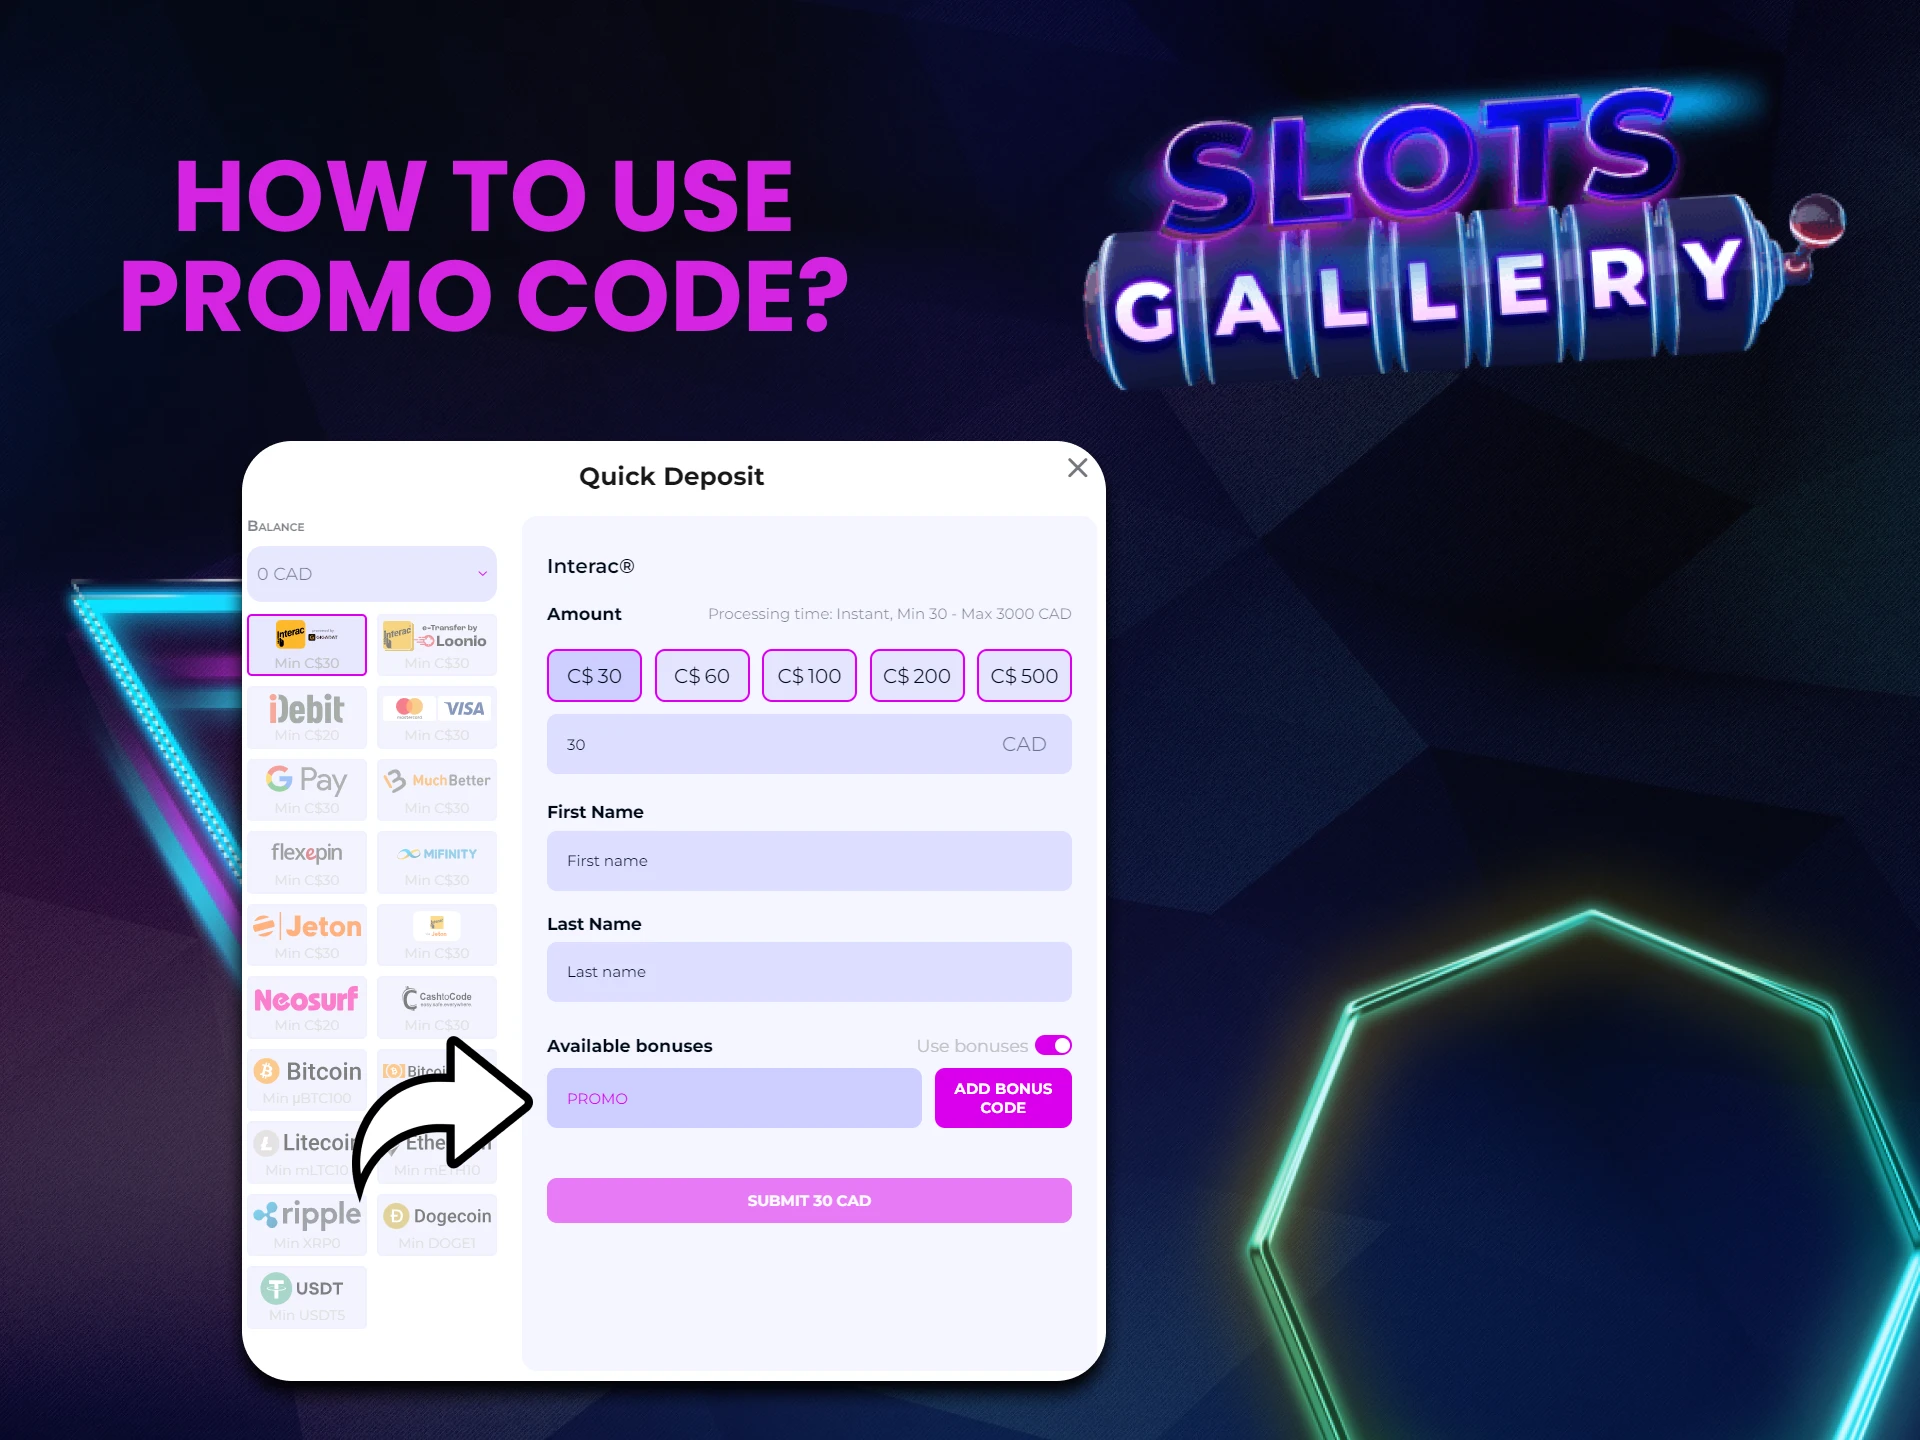 Use a promo code from Slots Gallery.